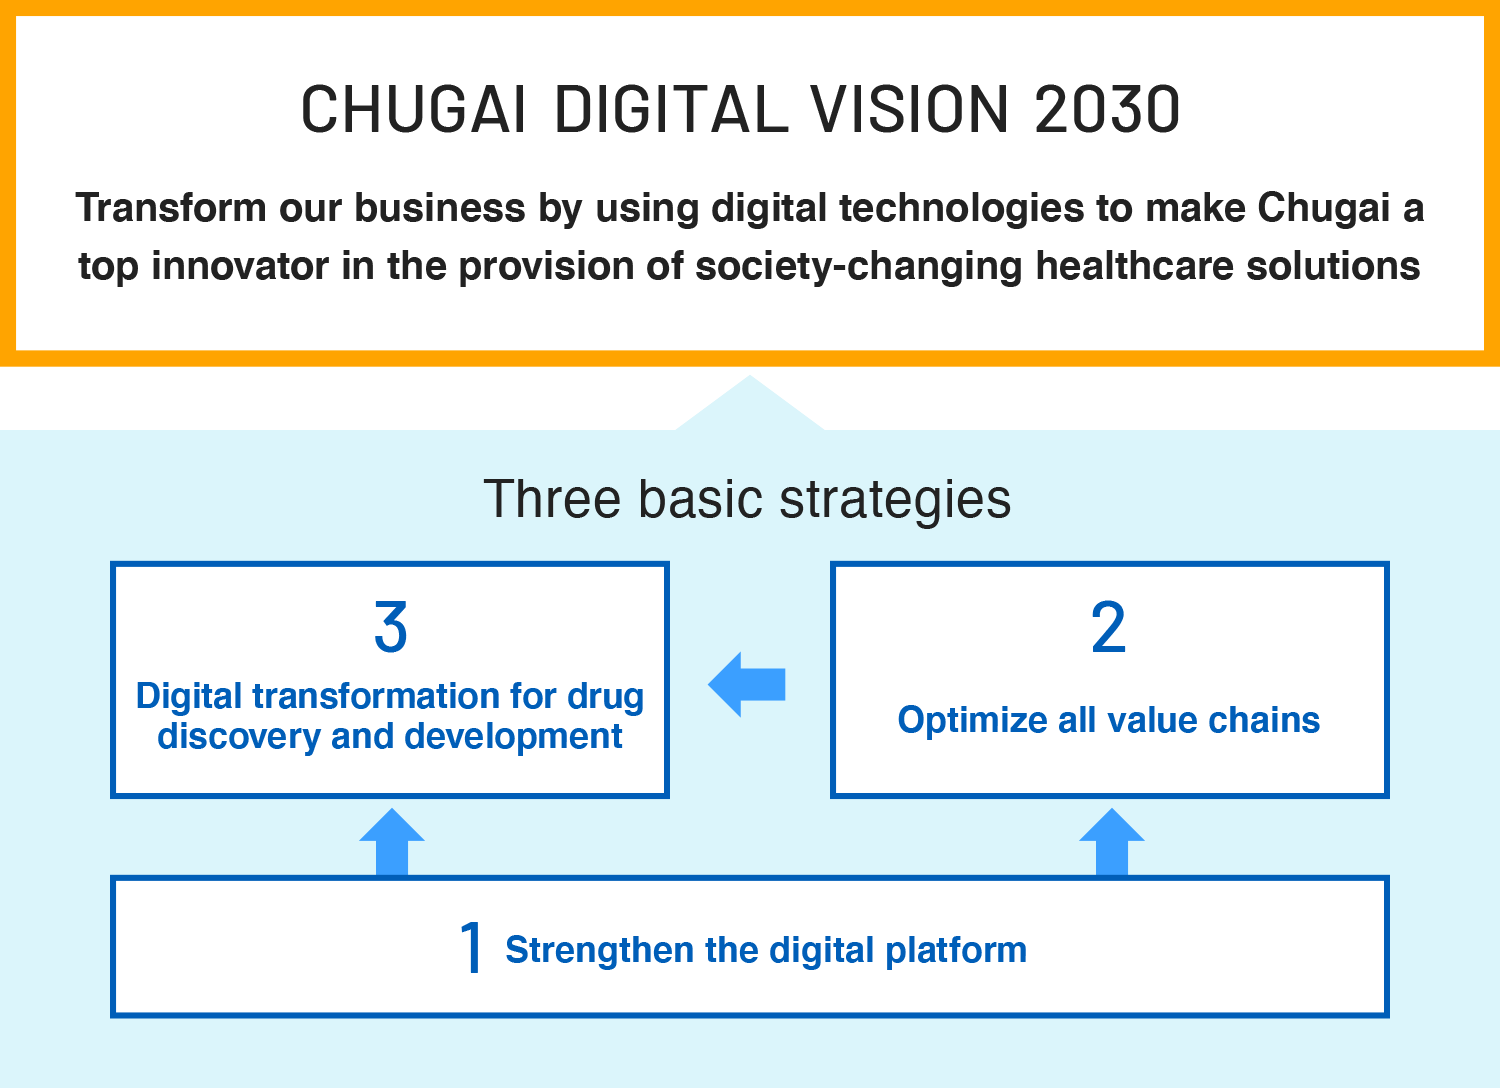 CHUGAI DIGITAL VISION 2030 Transform our business by using digital technologies to make Chugai a top innovator in the provision of society-changing healthcare solutions Three basic strategies 1.Strengthen the digital platform 2.Optimize all value chains 3.Digital transformation for drug discovery and development